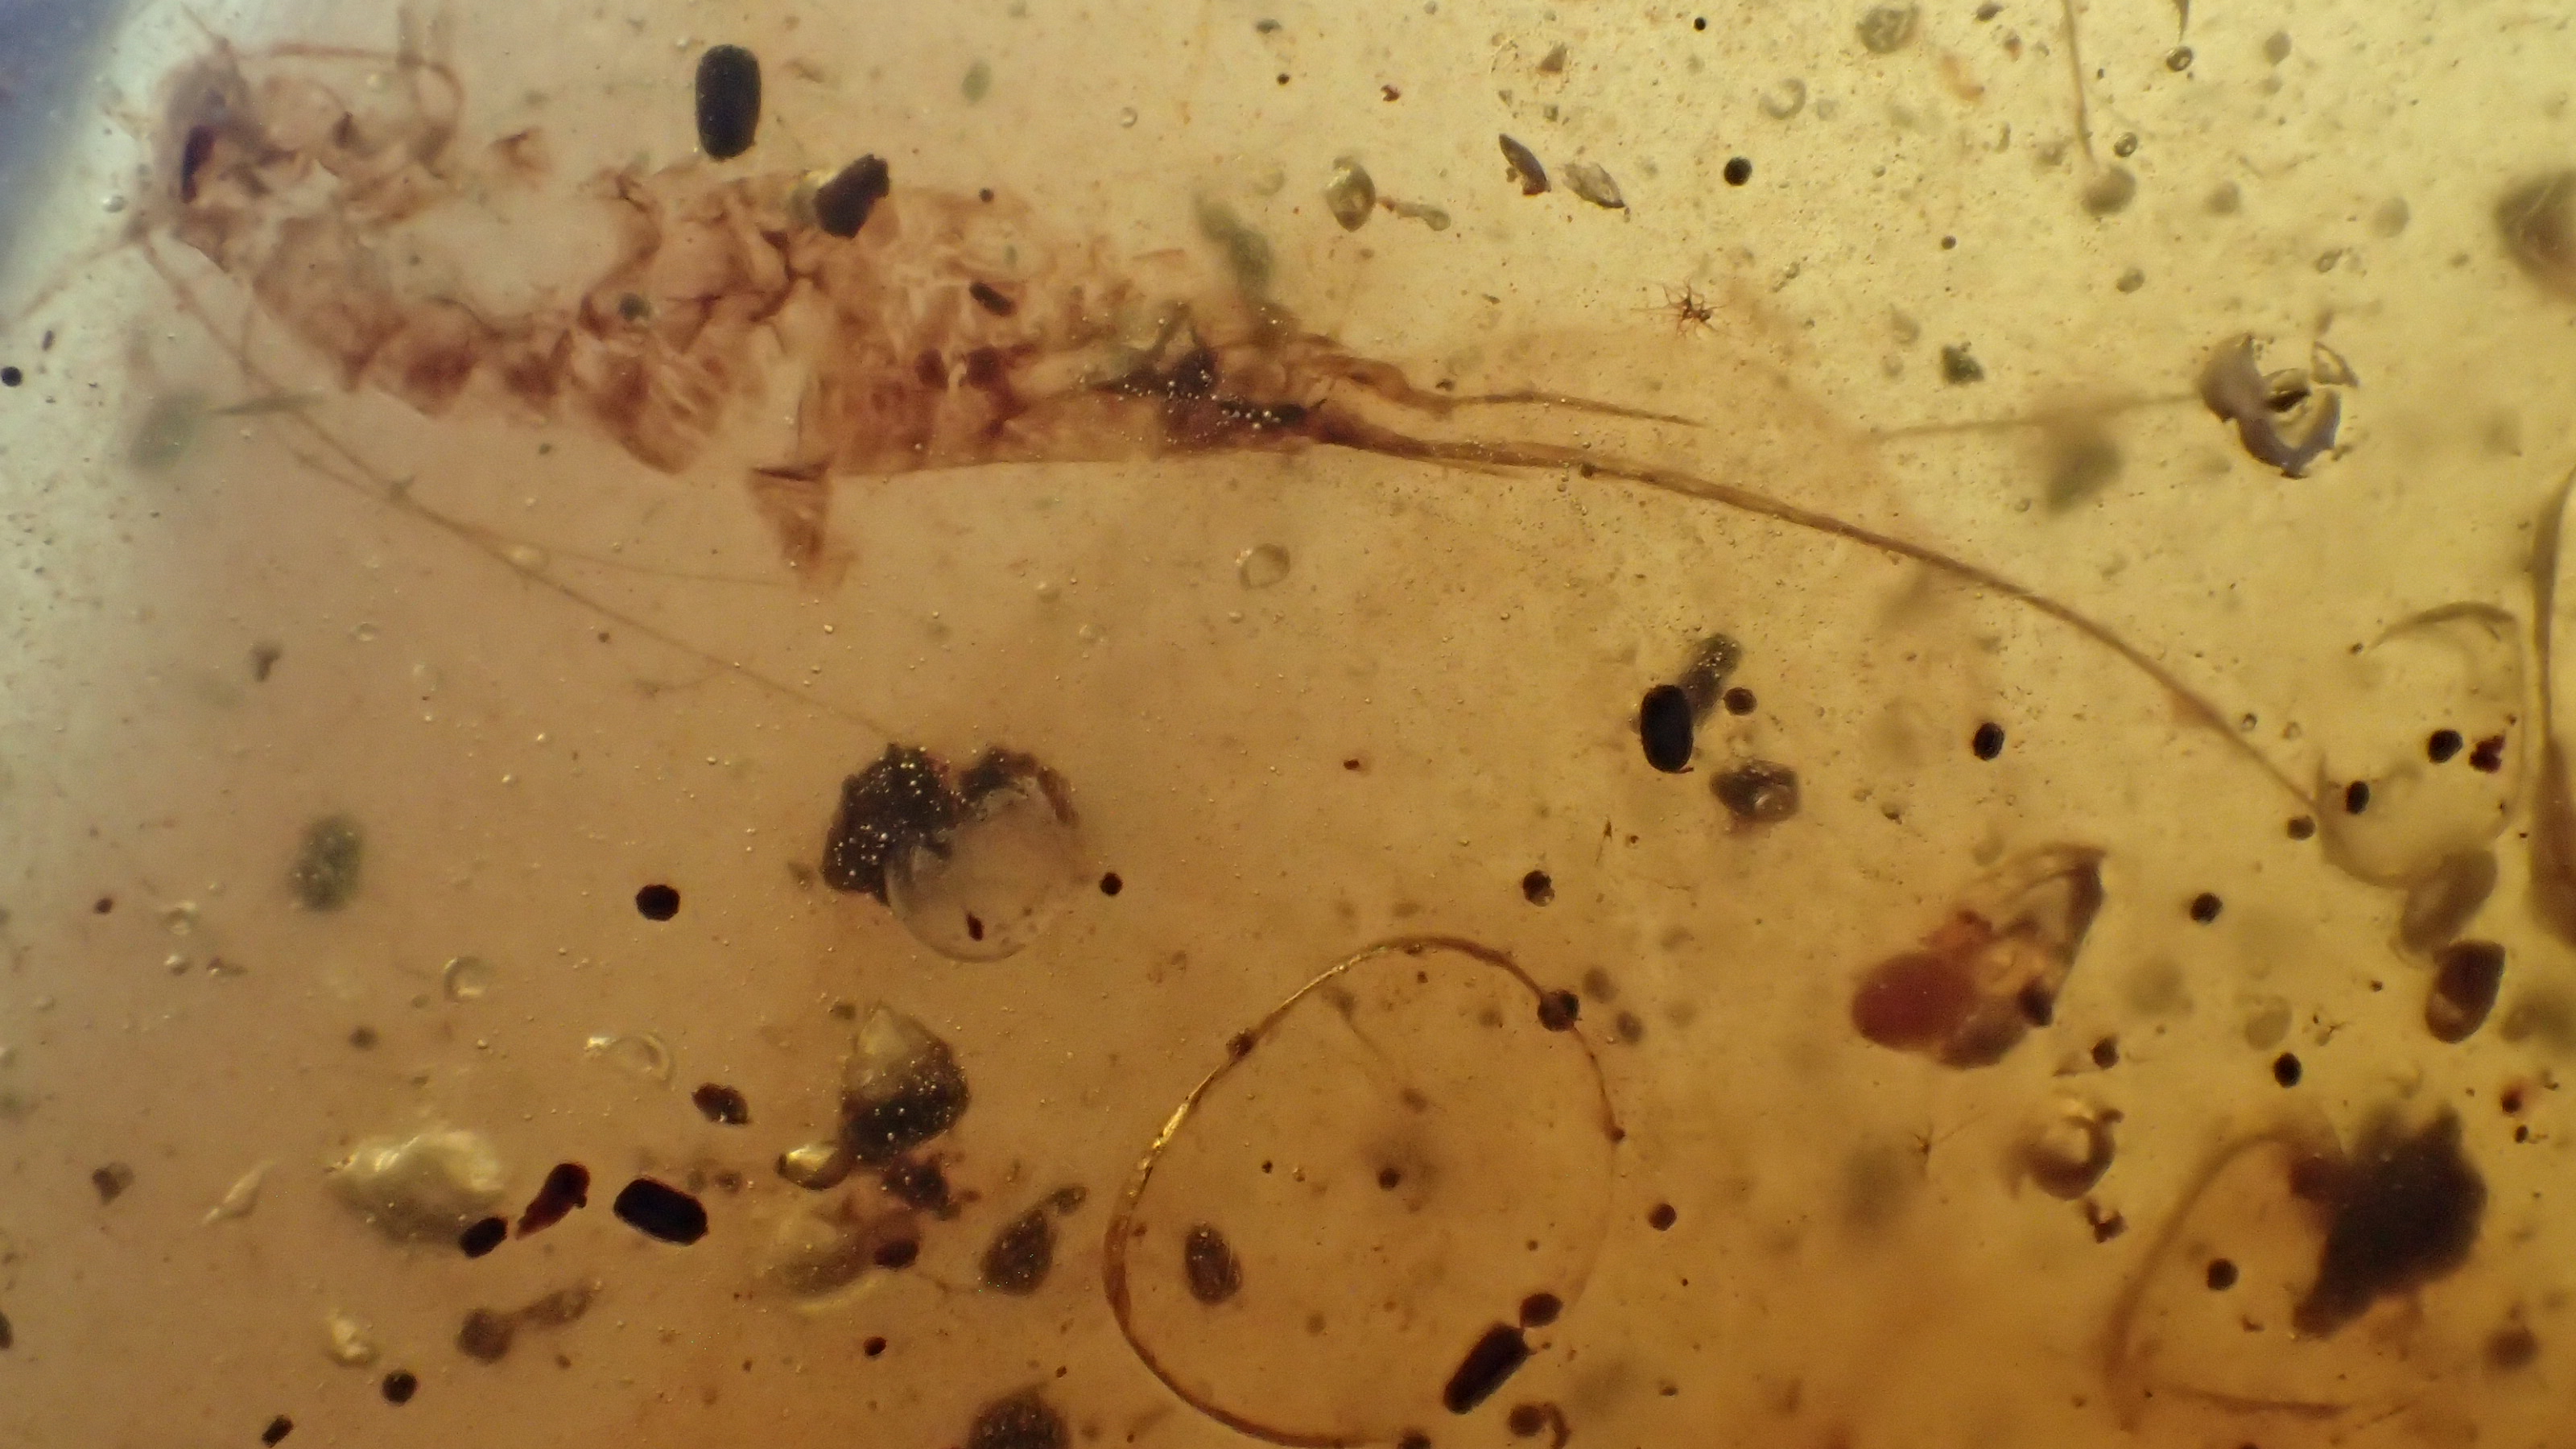 shrimp like creature in the amber with the anurognathus pterosaur